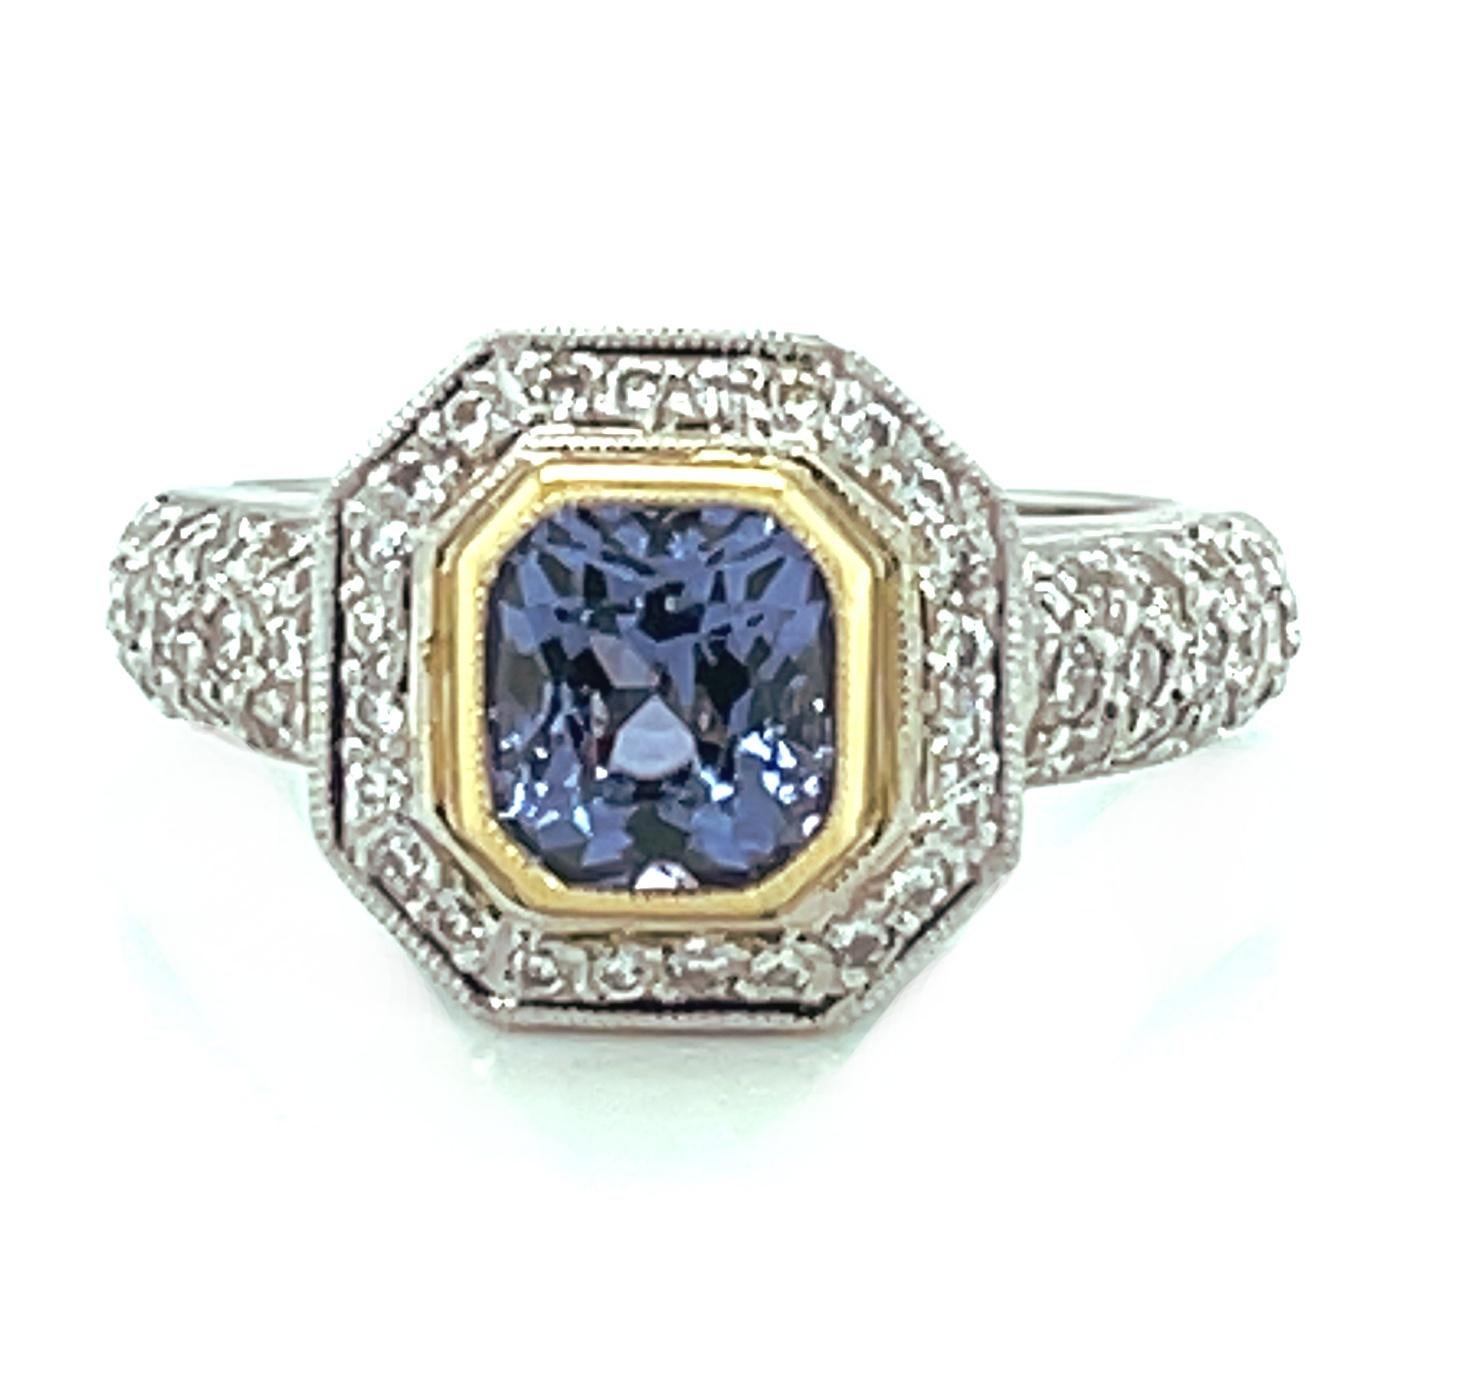 This sparkling, eye-catching ring features a gorgeous 1.54 carat radiant-cut purple spinel surrounded by brilliant white diamonds in a beautifully regal setting! The spinel  is an exceptional gem with bright lavender purple color and rich bluish